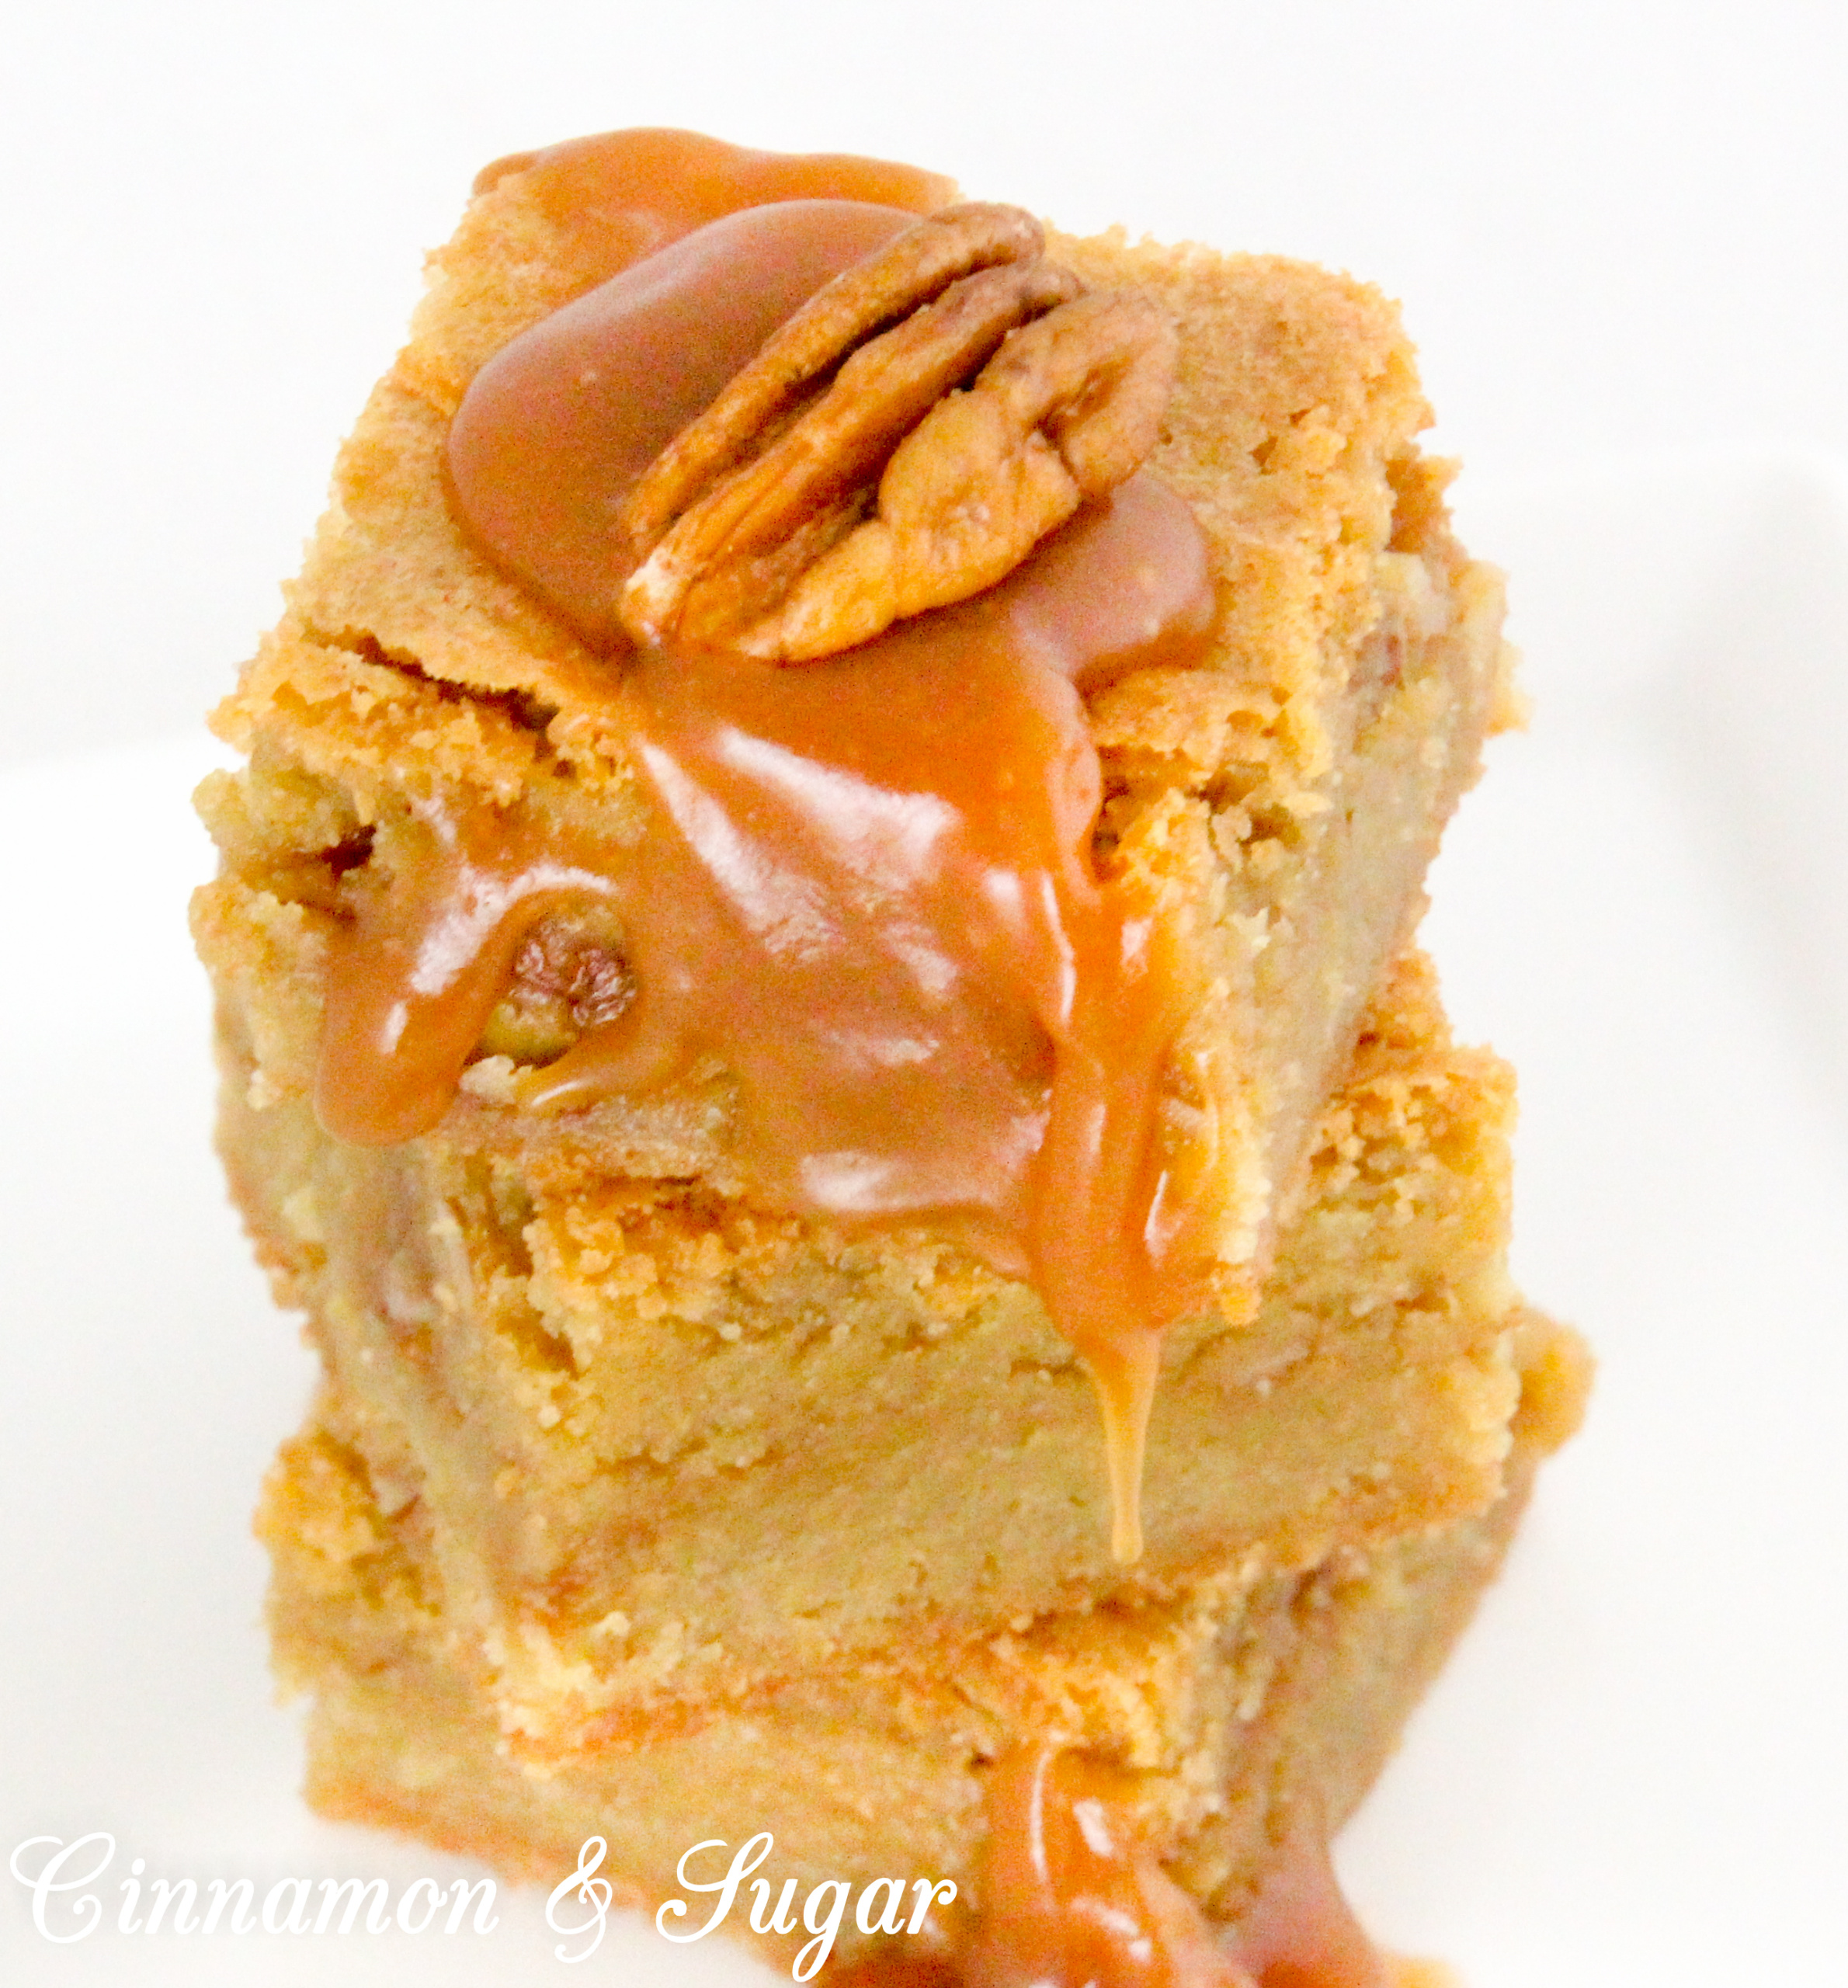 Caramel Blondies have a luscious layer of homemade salted caramel sauce and a generous sprinkle of chopped pecans between rich, buttery blondies. Recipe shared with permission granted by Daryl Wood Gerber, author of A SPRINKLING OF MURDER.